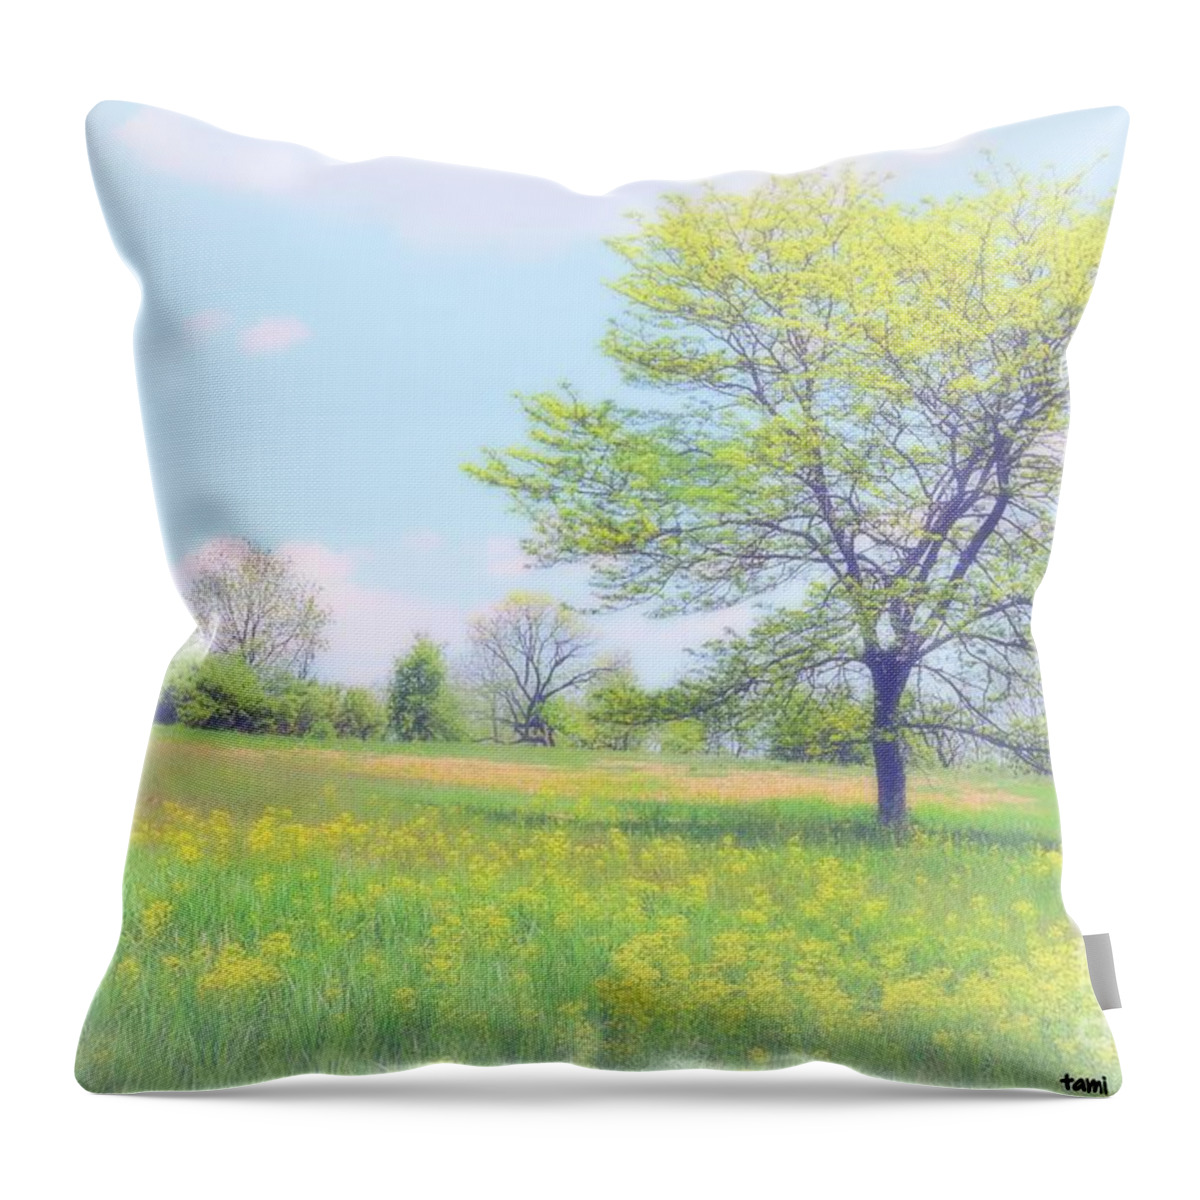 Nature Throw Pillow featuring the photograph Peace On The Hillside by Tami Quigley